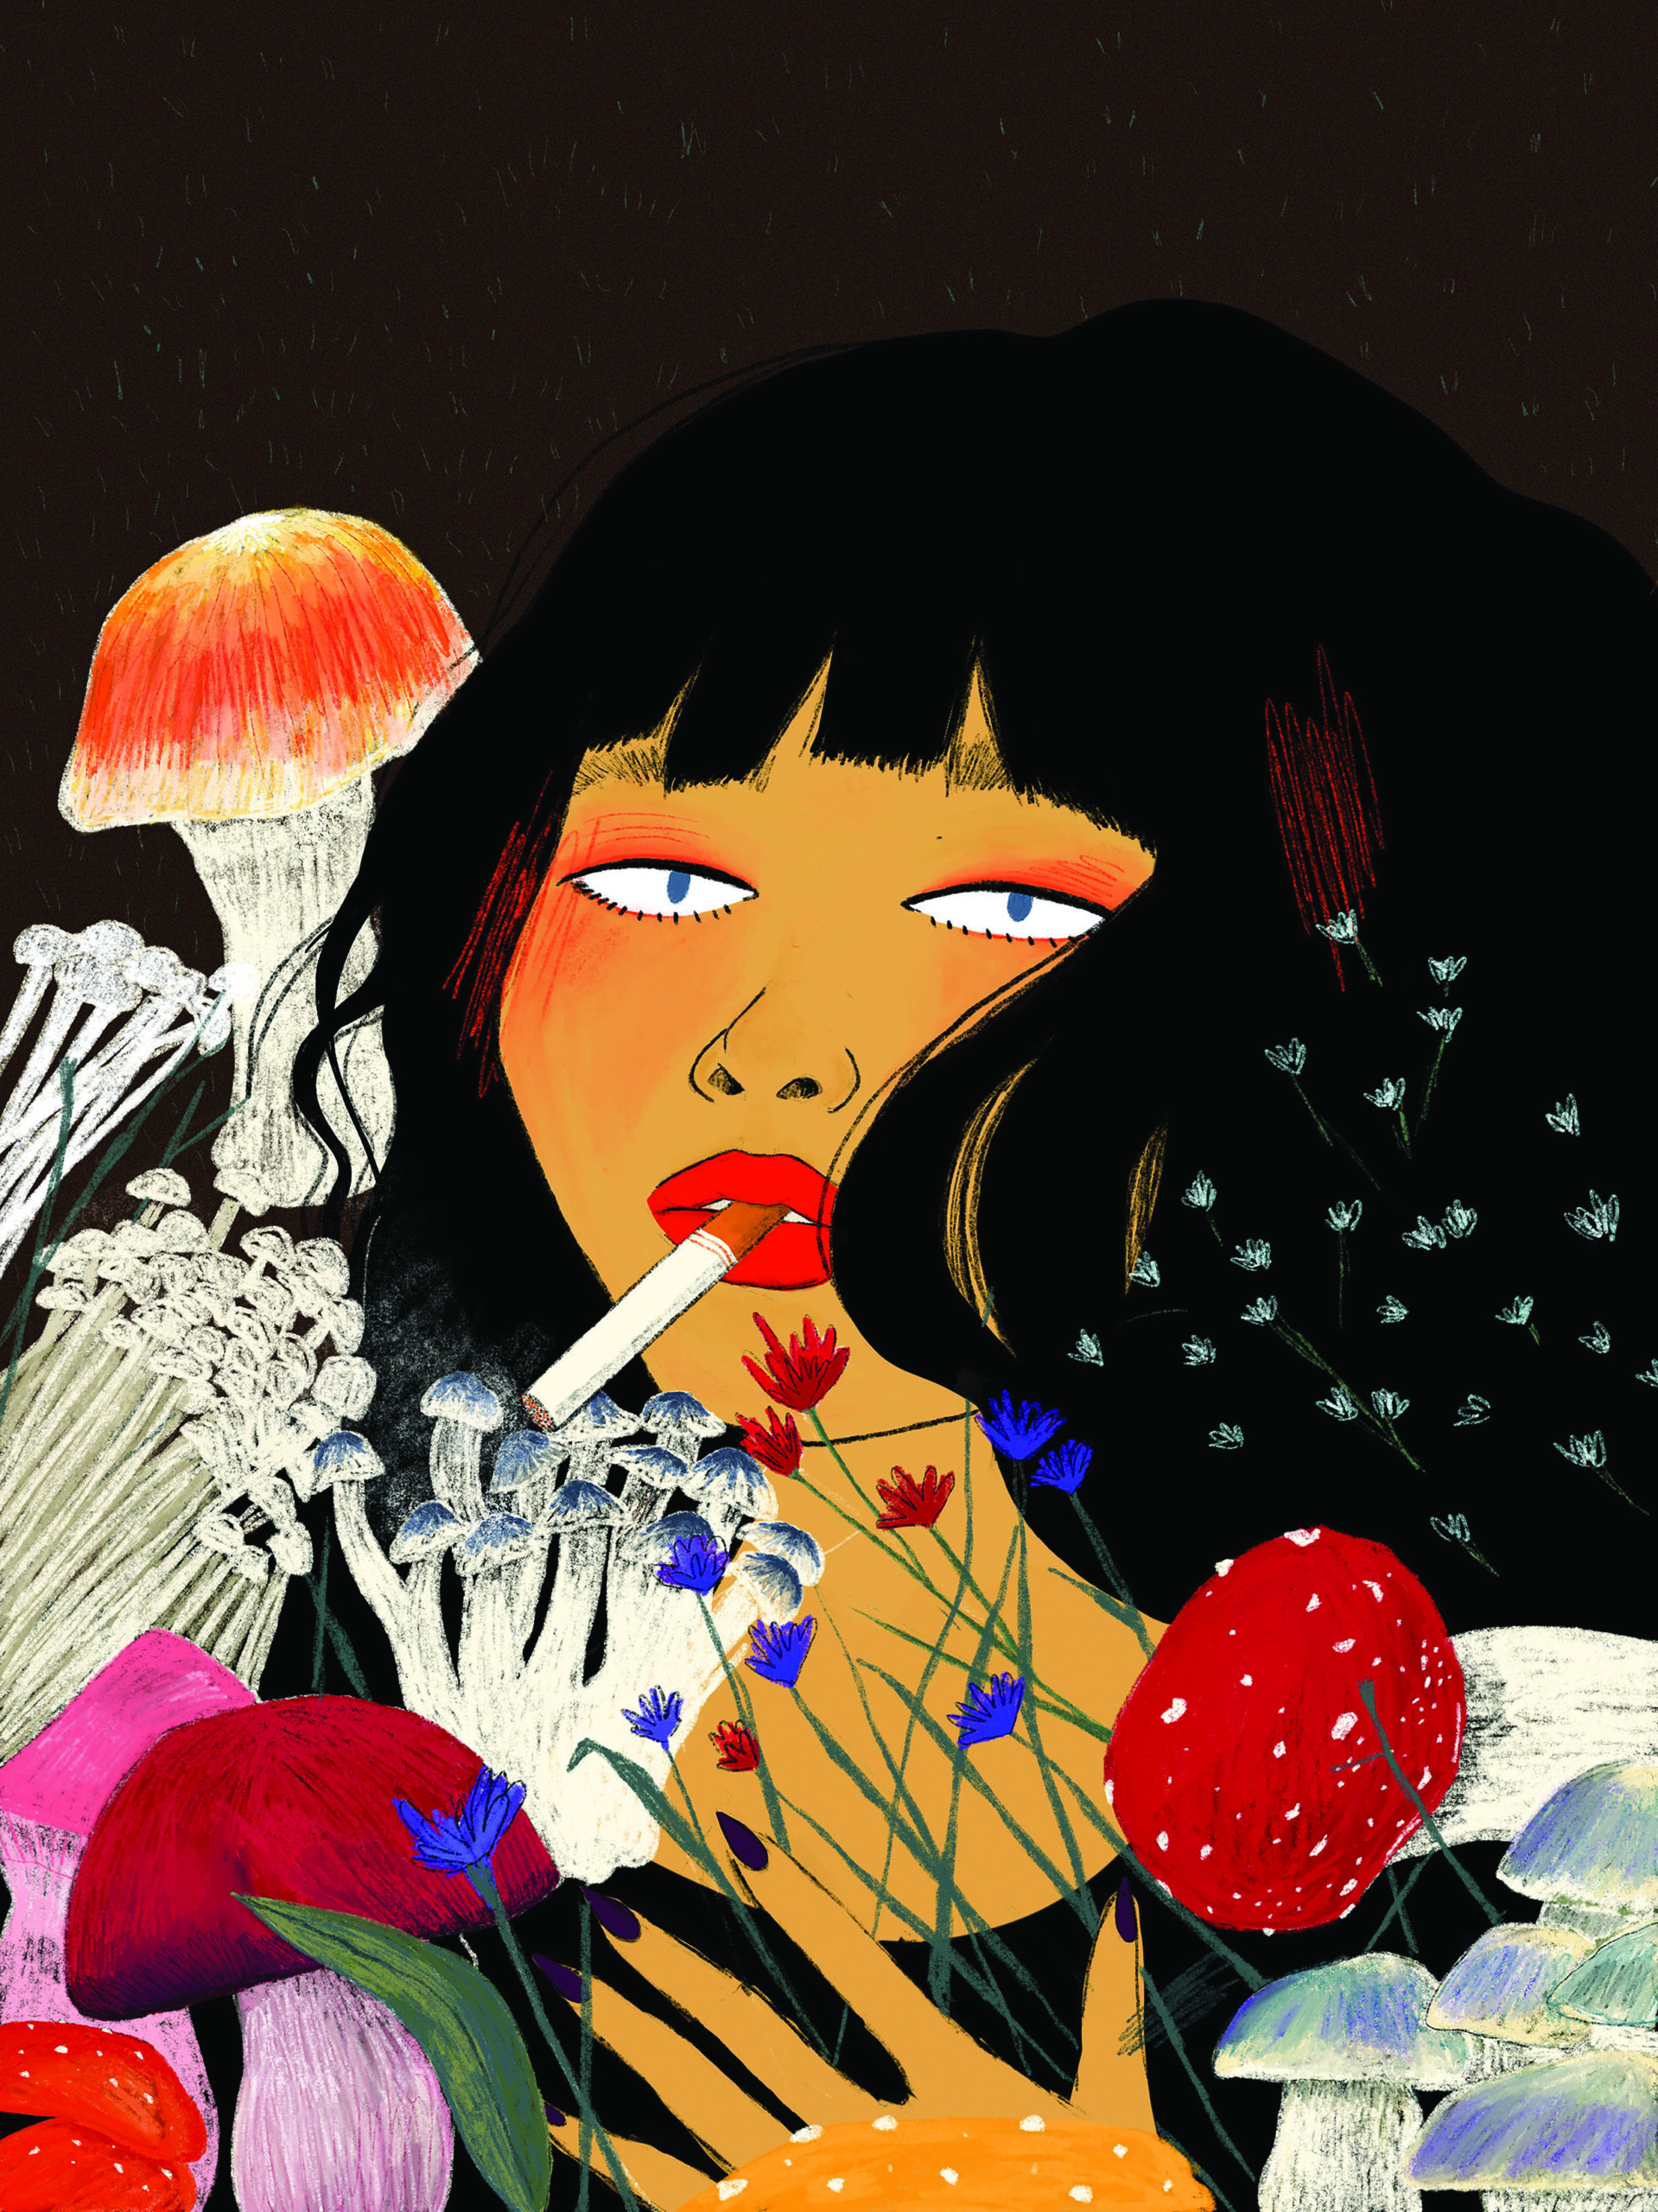 An illustration of a girl with red lips and a cigarette in her mouth. She is surrounded by mushrooms of various colors as she looks despondently towards the viewer.